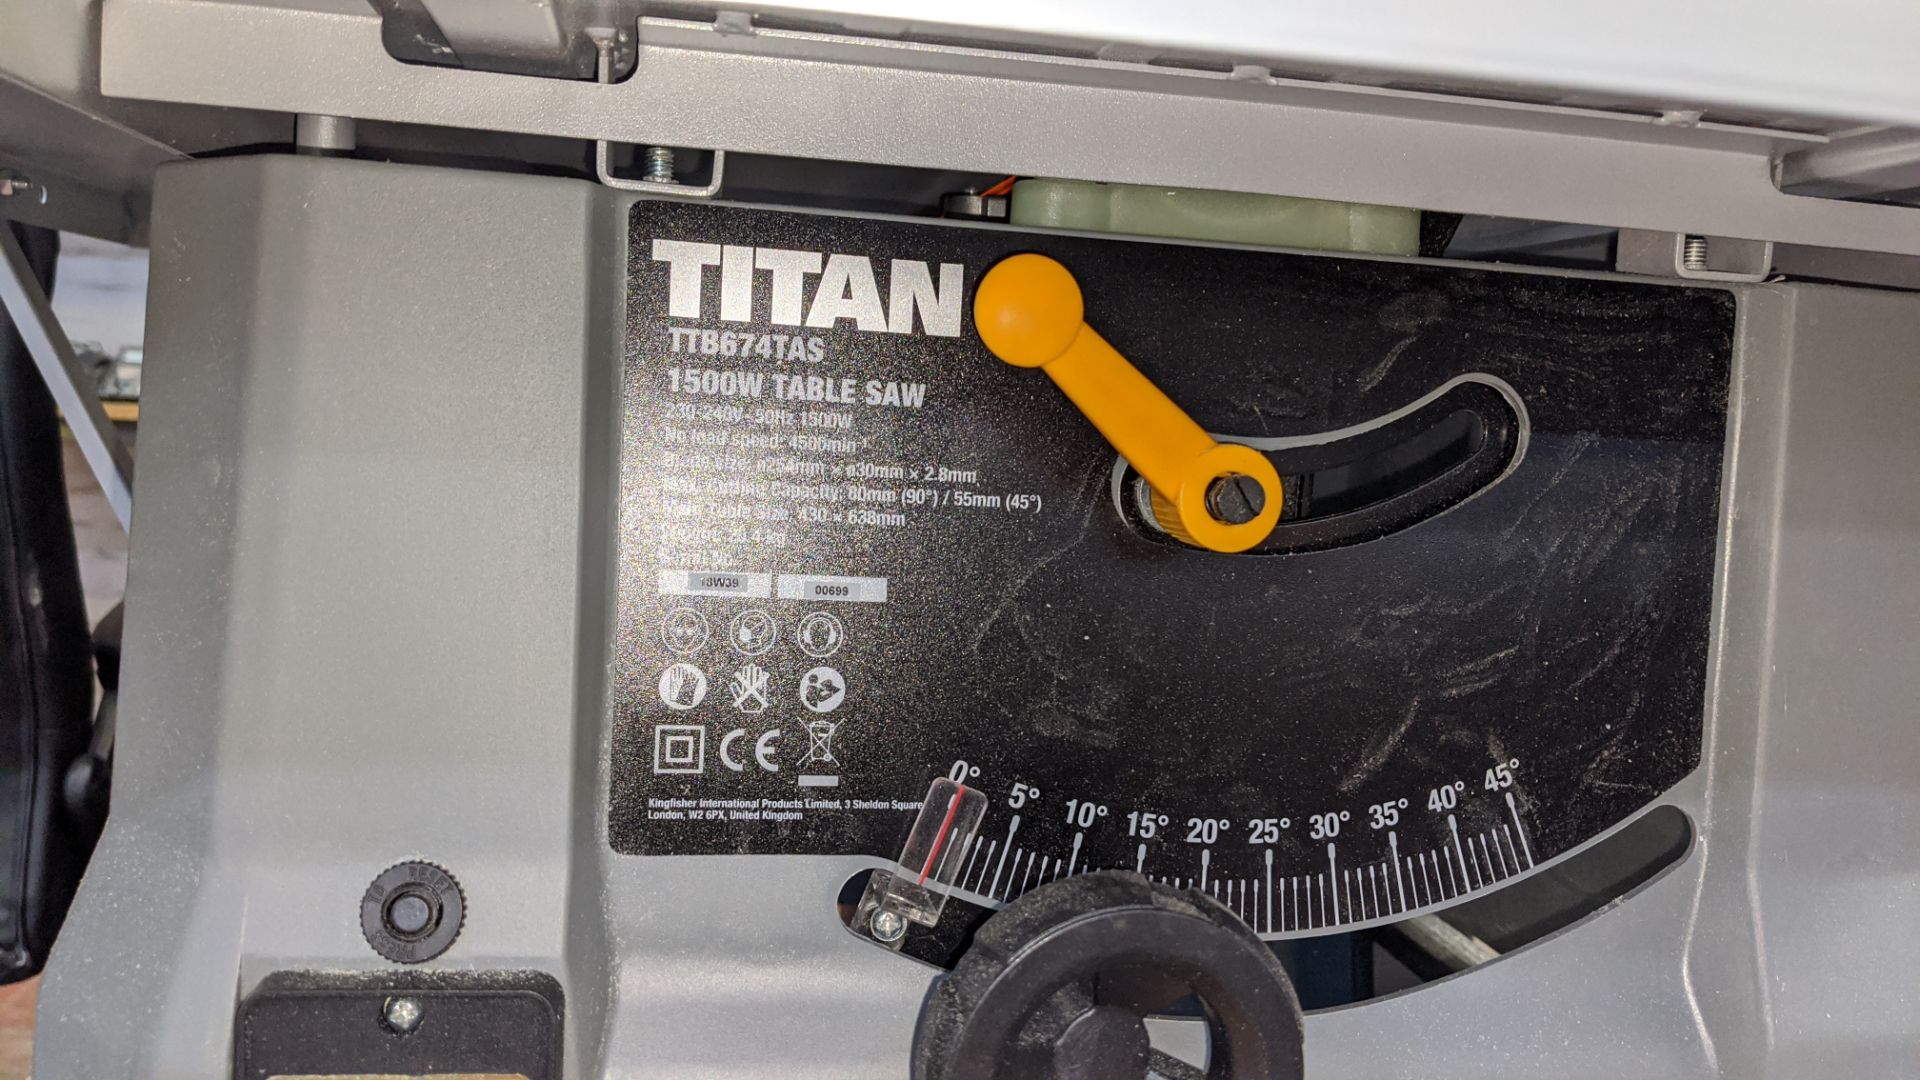 Titan 1500w table saw model TTB674TAS. Lots 22 - 53 are all located inside our warehouse. Please - Image 5 of 7